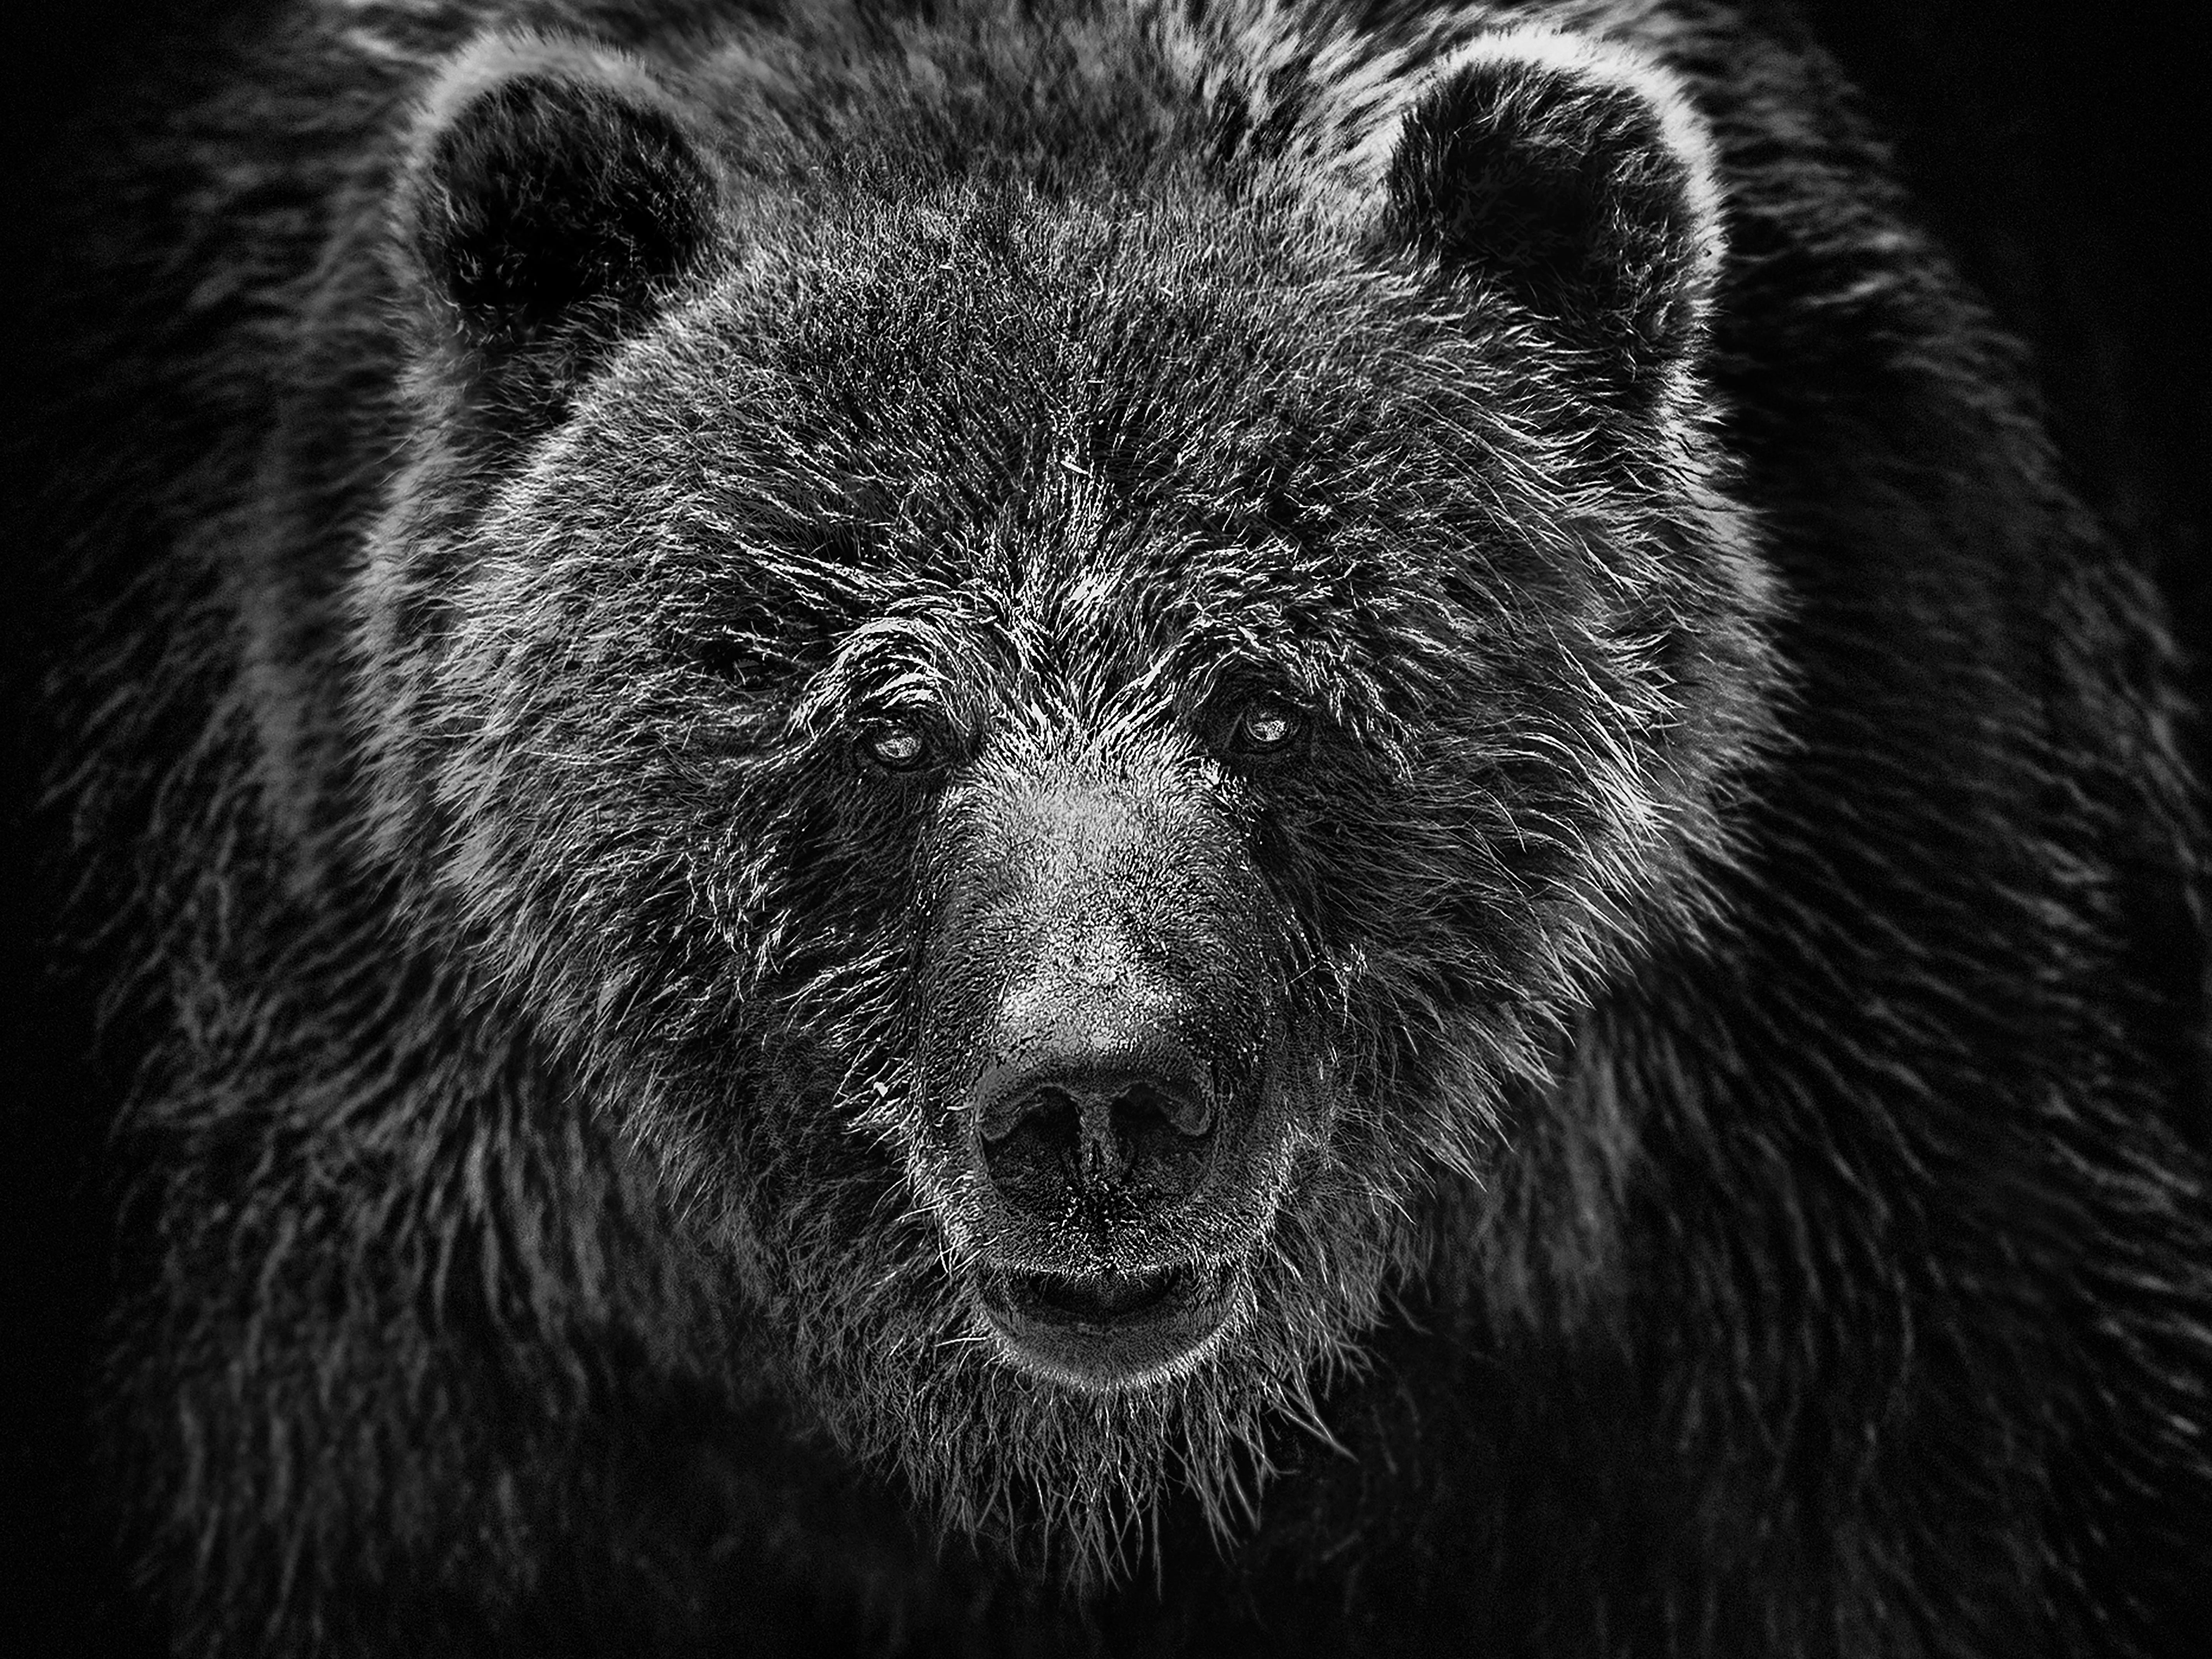 Shane Russeck Animal Print - "Grizzly Portrait" 12x12 - Black and White Photography of a Grizzly Bear 